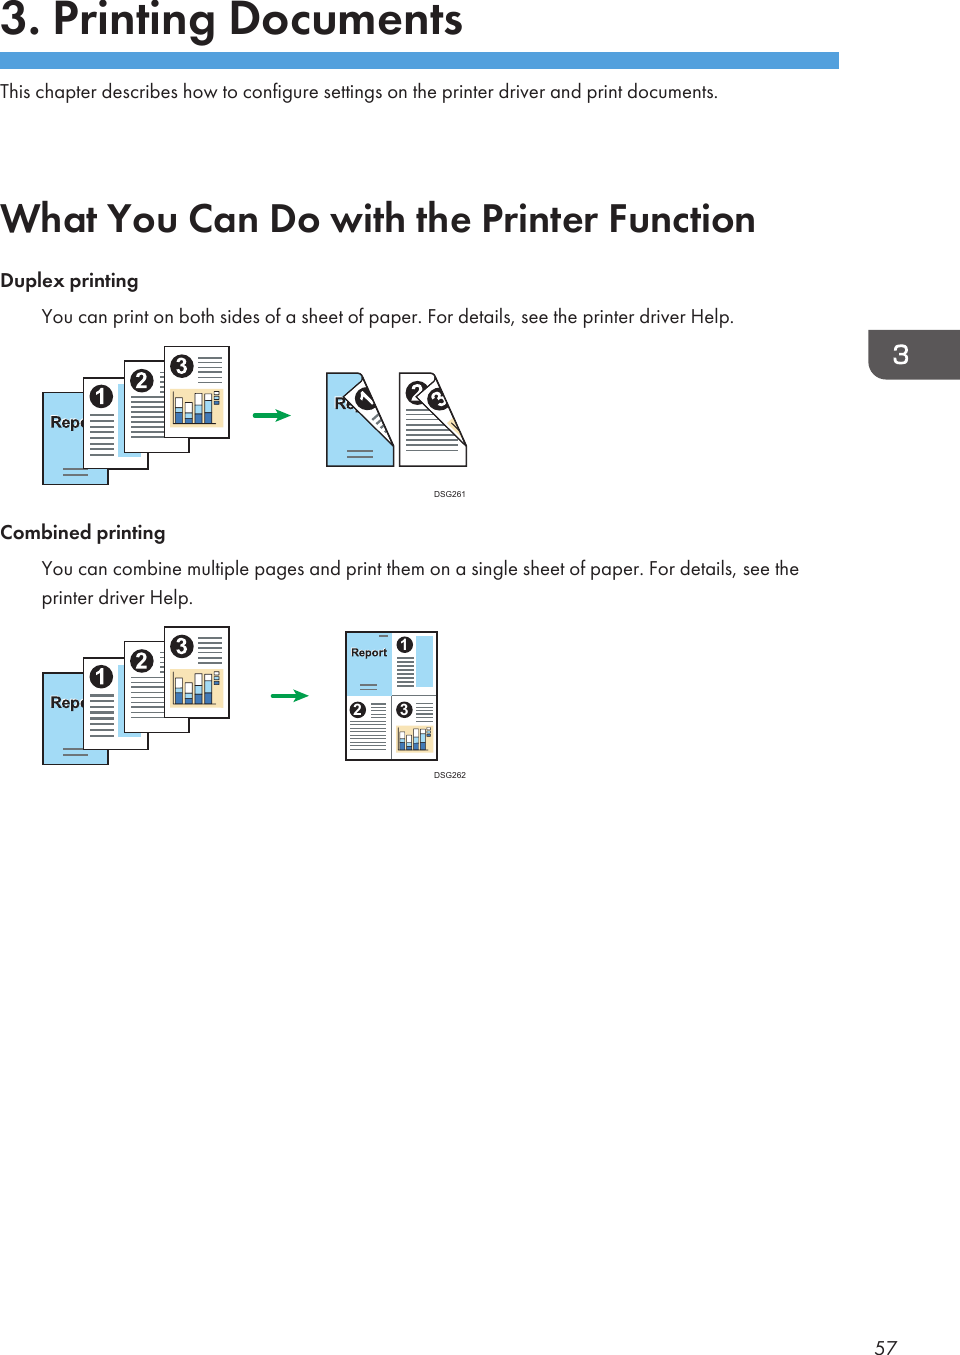 3. Printing DocumentsThis chapter describes how to configure settings on the printer driver and print documents.What You Can Do with the Printer FunctionDuplex printingYou can print on both sides of a sheet of paper. For details, see the printer driver Help.DSG261Combined printingYou can combine multiple pages and print them on a single sheet of paper. For details, see theprinter driver Help.123DSG26257